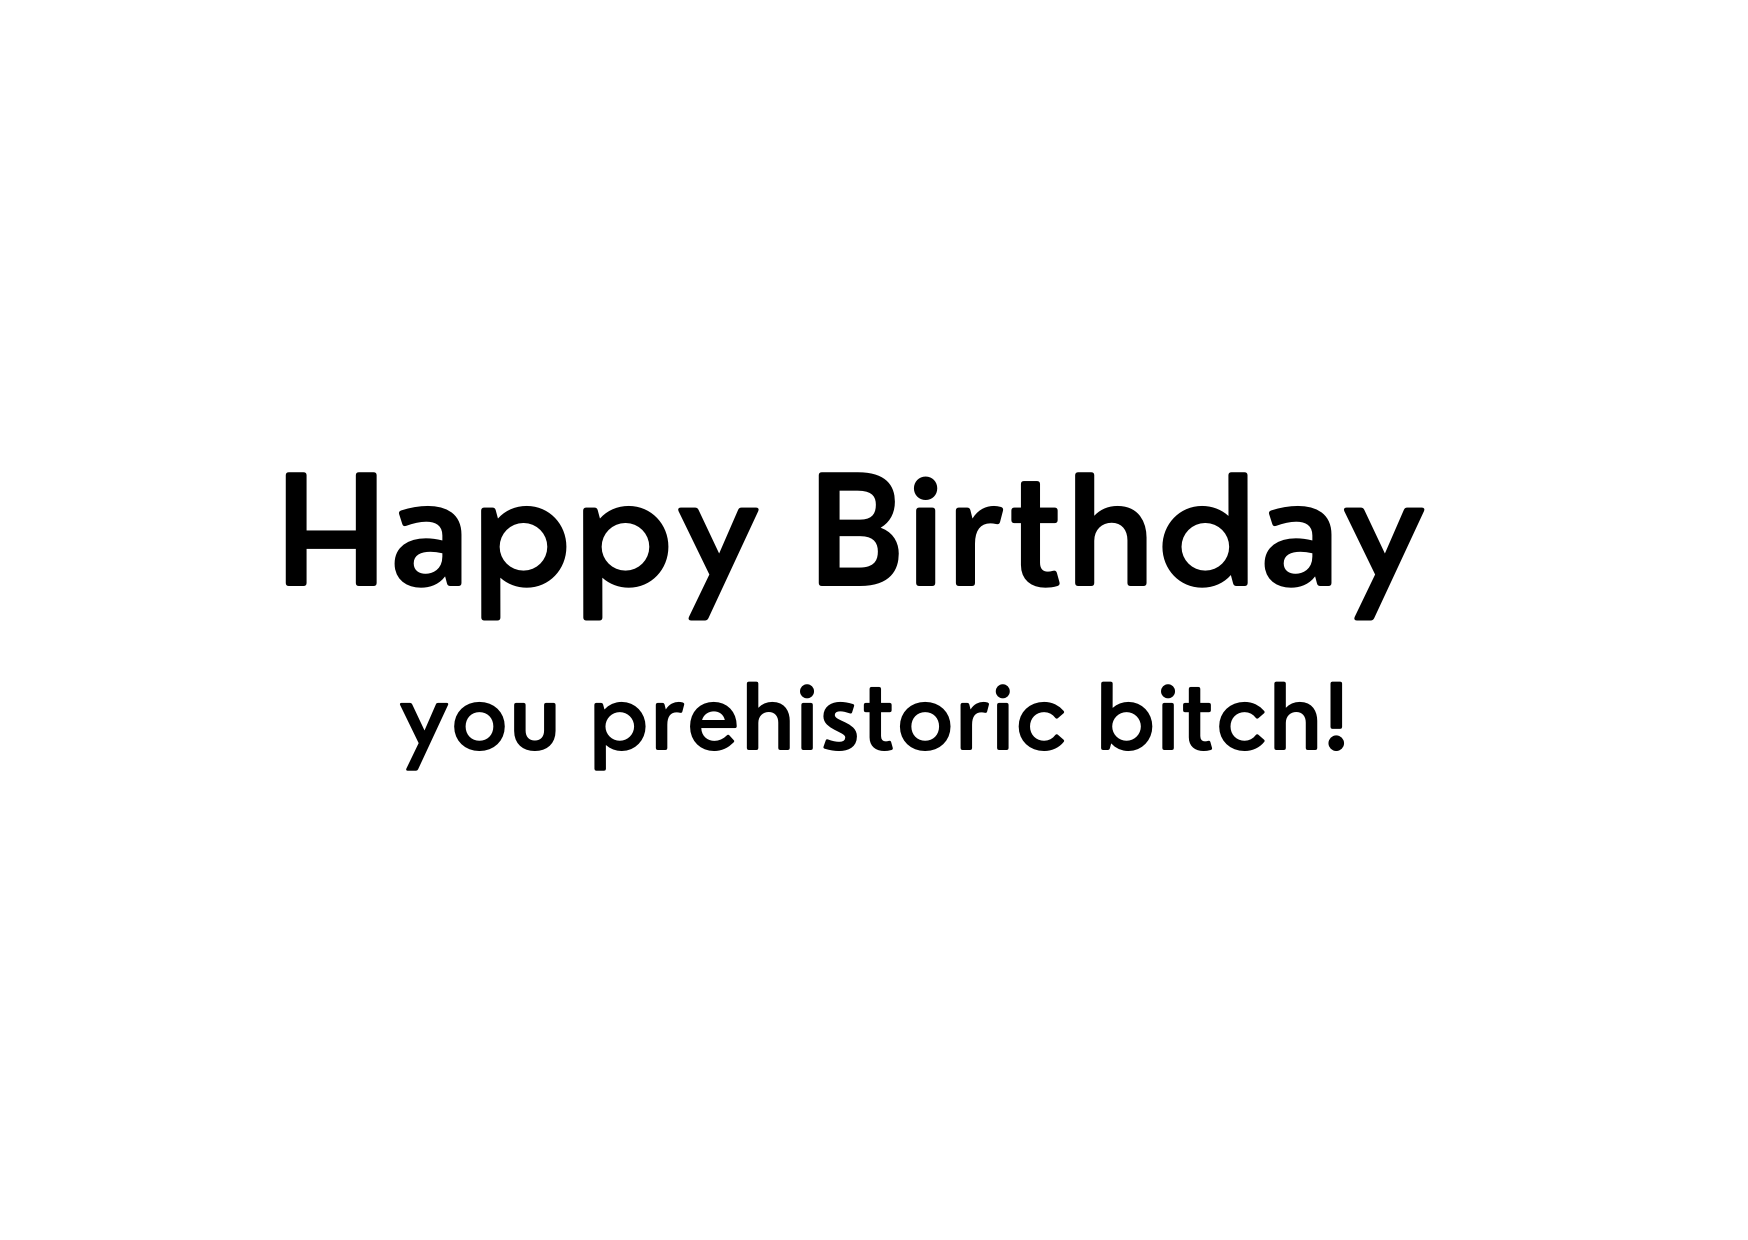 White seed paper greeting card saying "Happy birthday you prehistoric bitch!